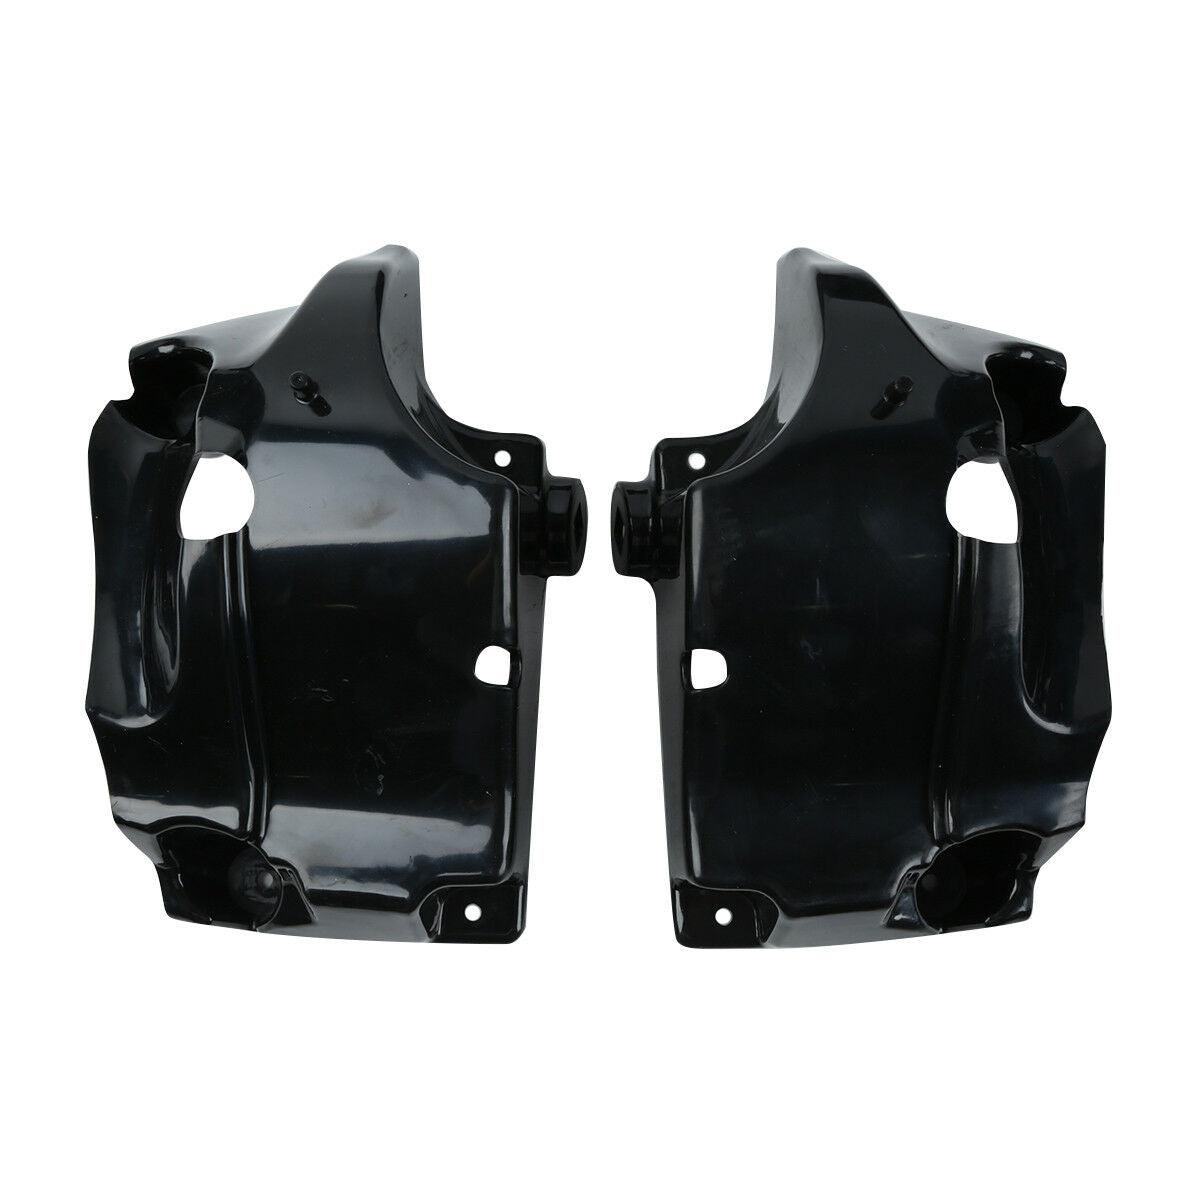 Lower Vented Leg Fairing Fit For Harley Touring Road King Street Glide 1983-2013 - Moto Life Products